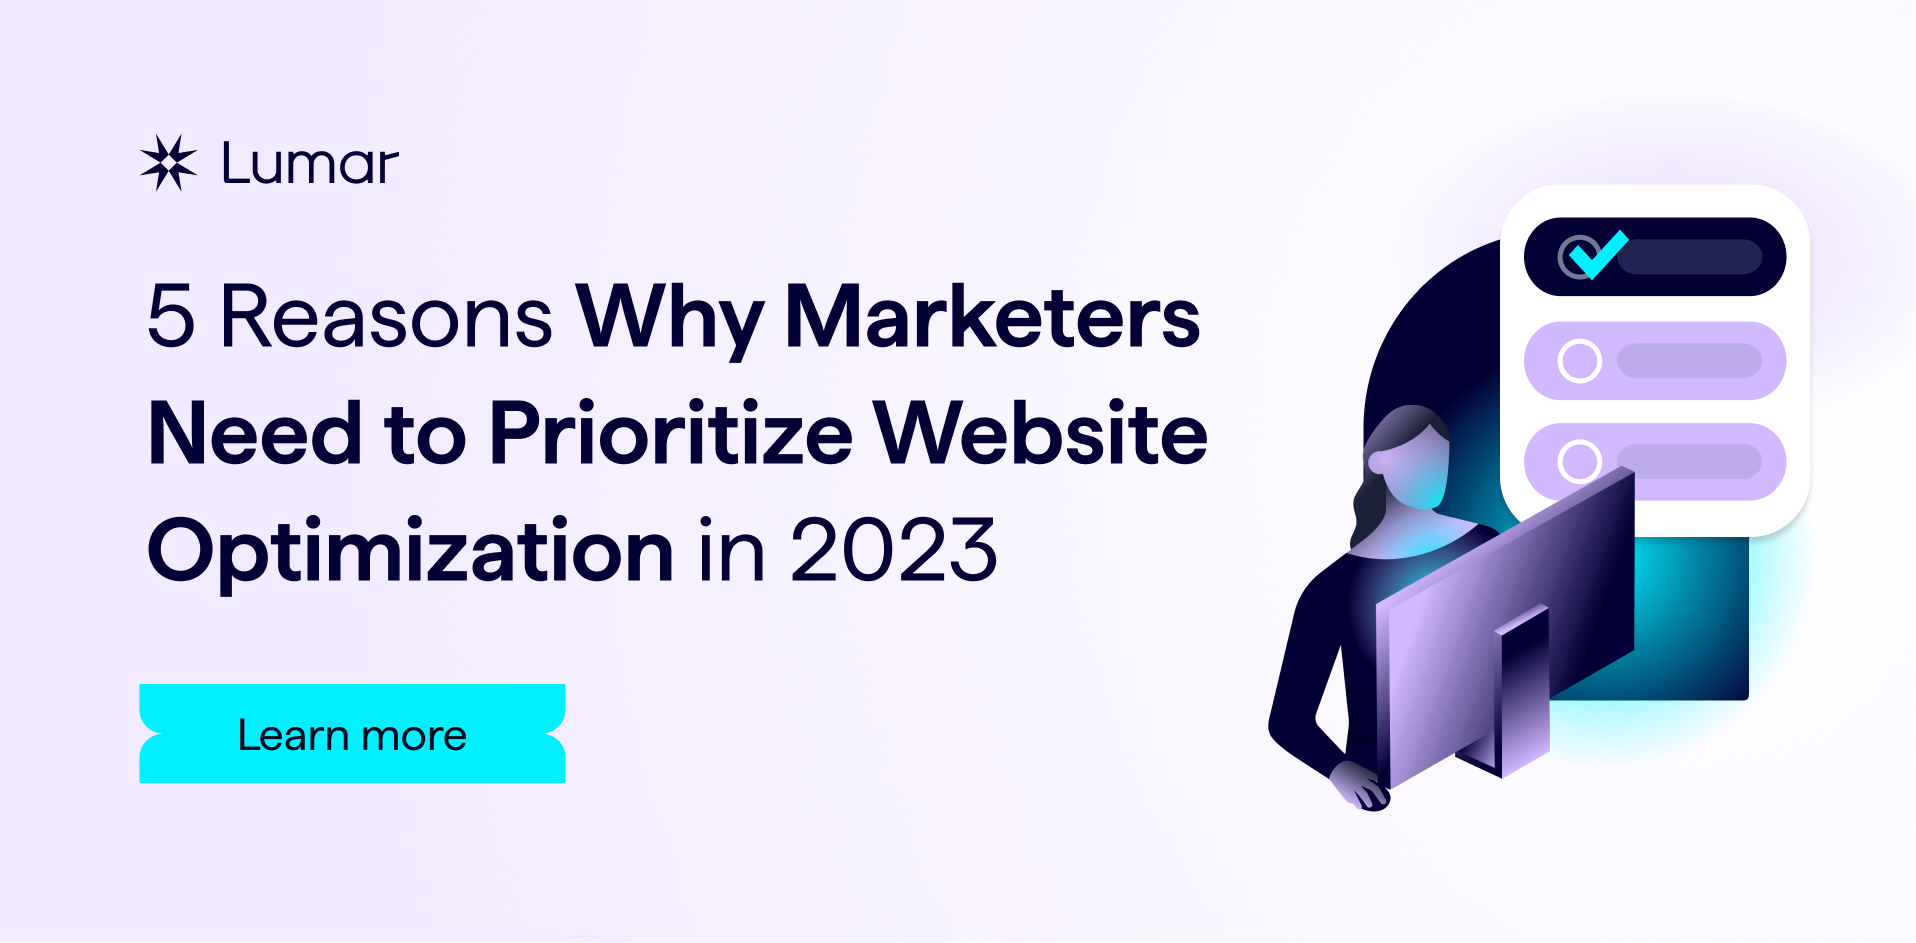 5 Reasons Why Marketers Need To Prioritize Their Websites’ Technical Health in 2023